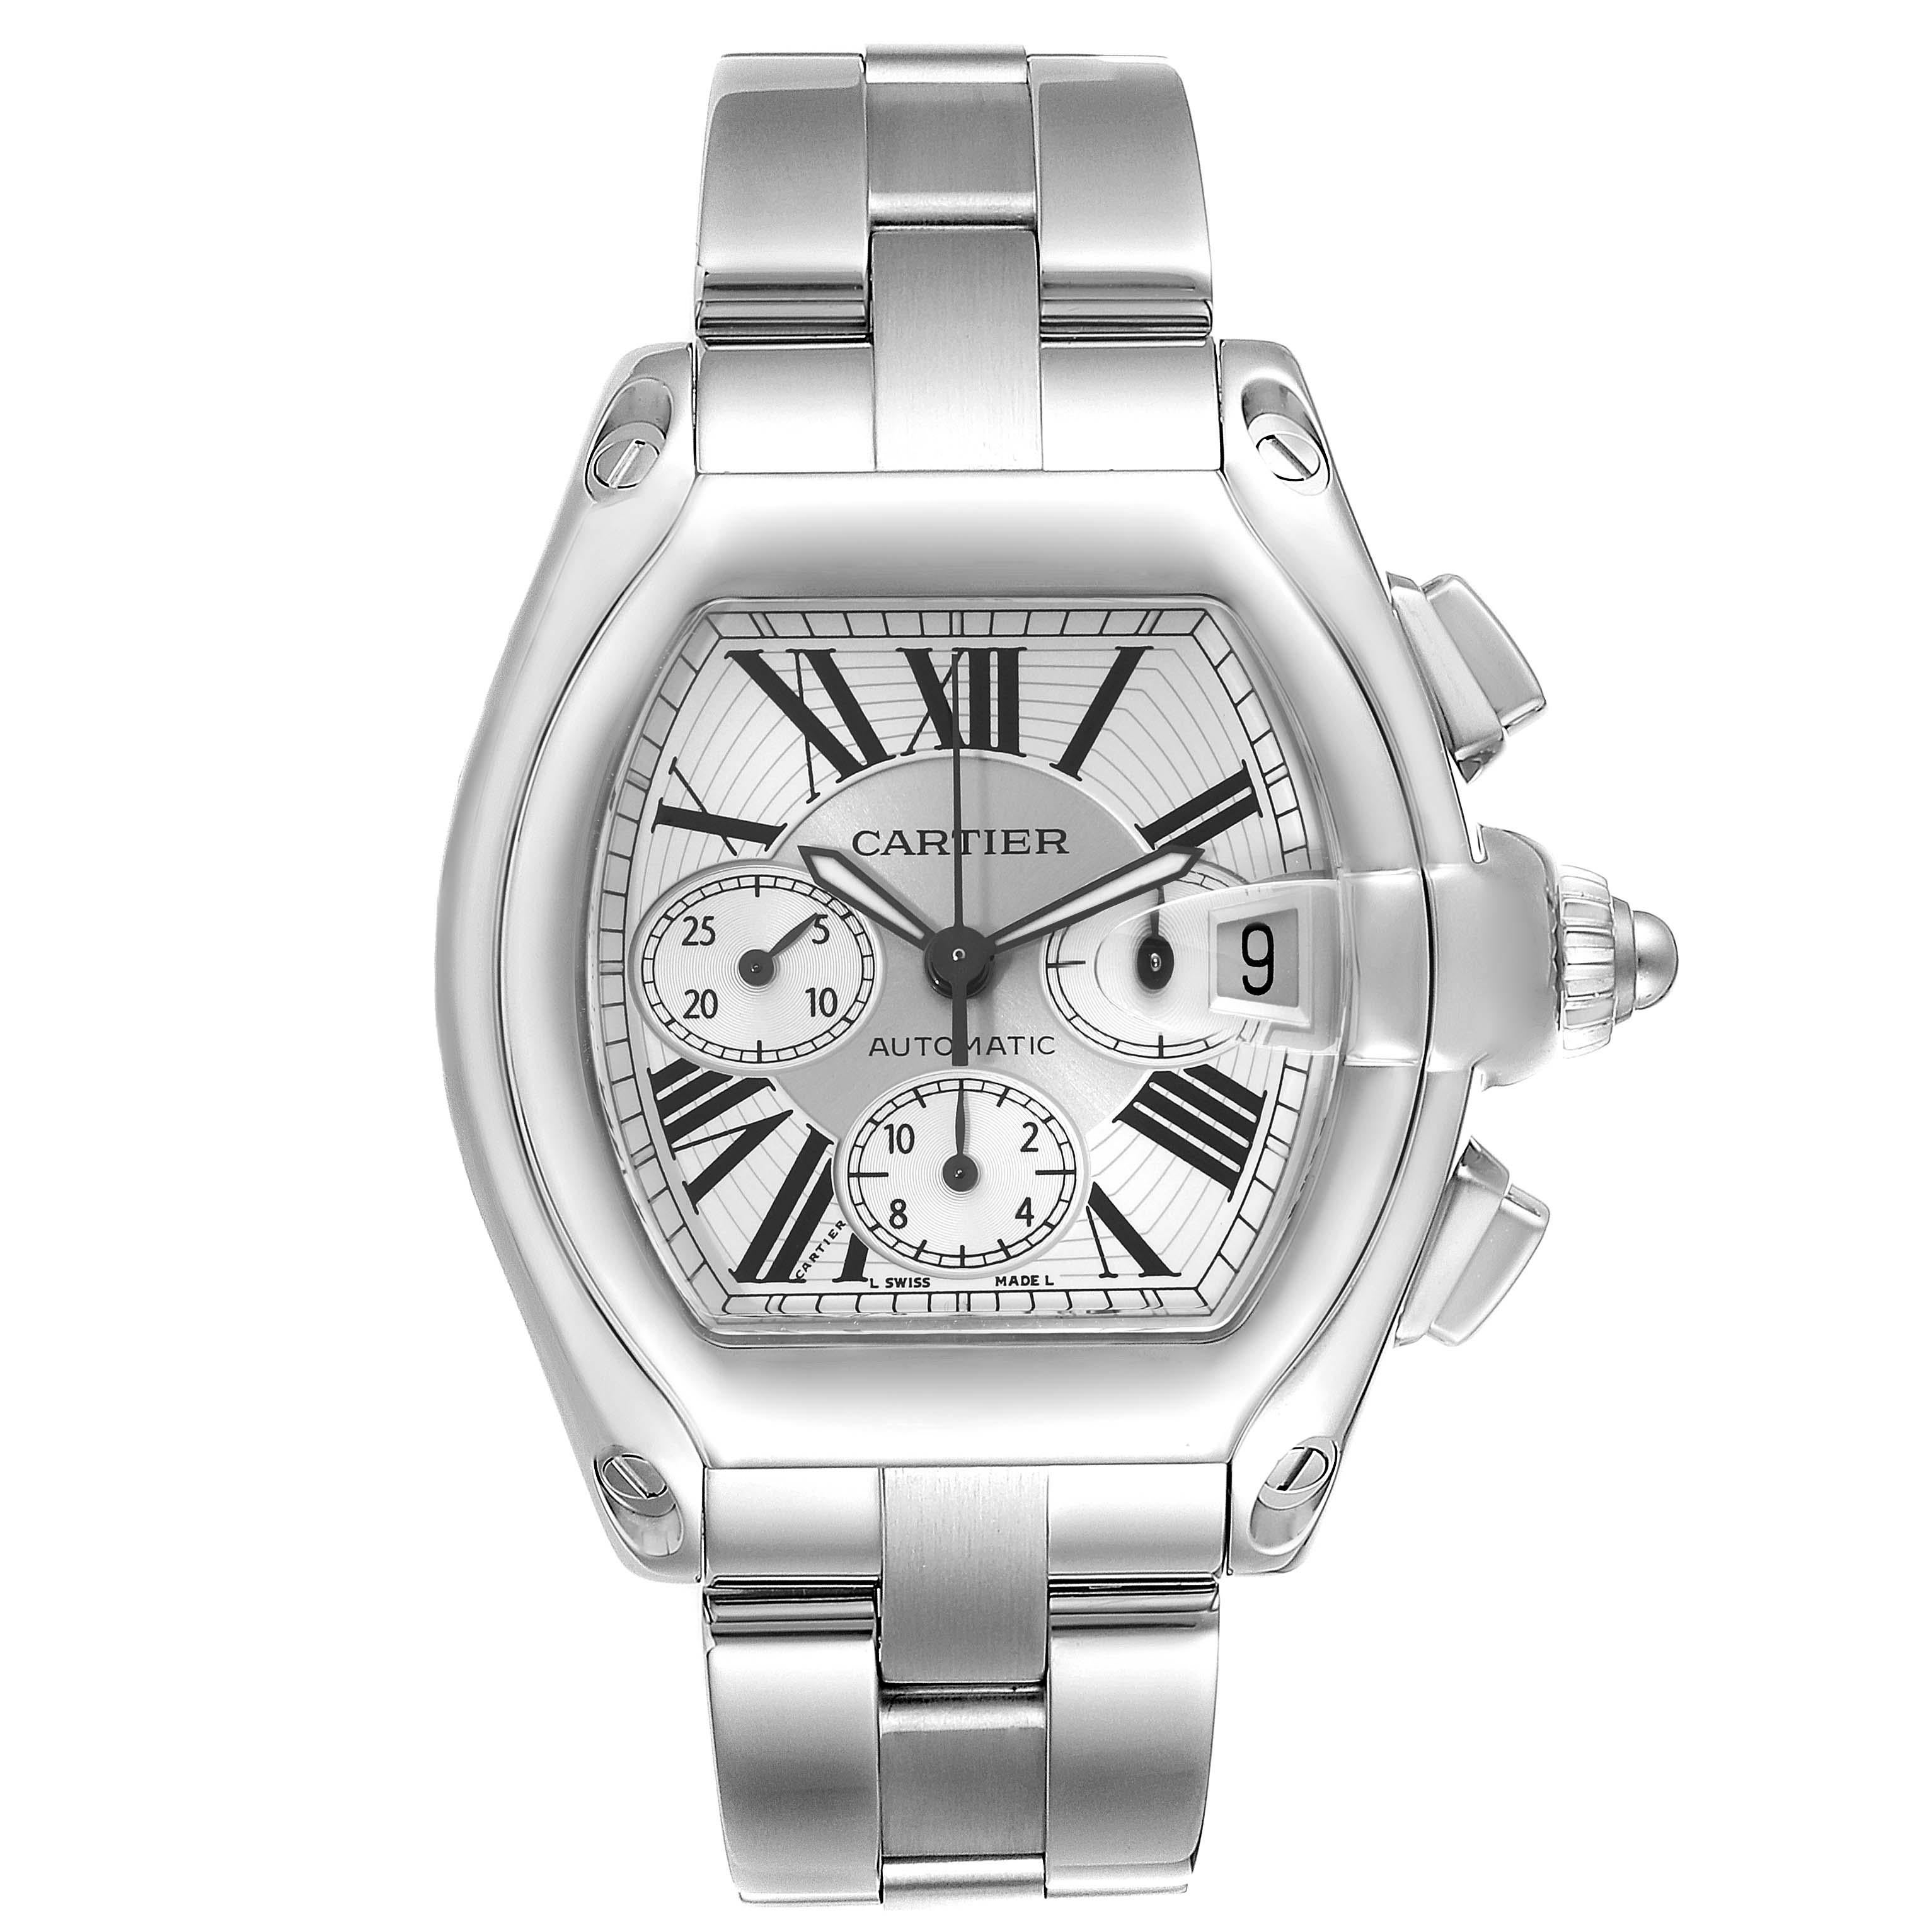 Cartier Roadster XL Chronograph Steel Mens Watch W62019X6 Box Papers. Automatic self-winding movement with chronograph function. Stainless steel tonneau shaped case 49 x 43mm. . Scratch resistant sapphire crystal with cyclops magnifier. Silver